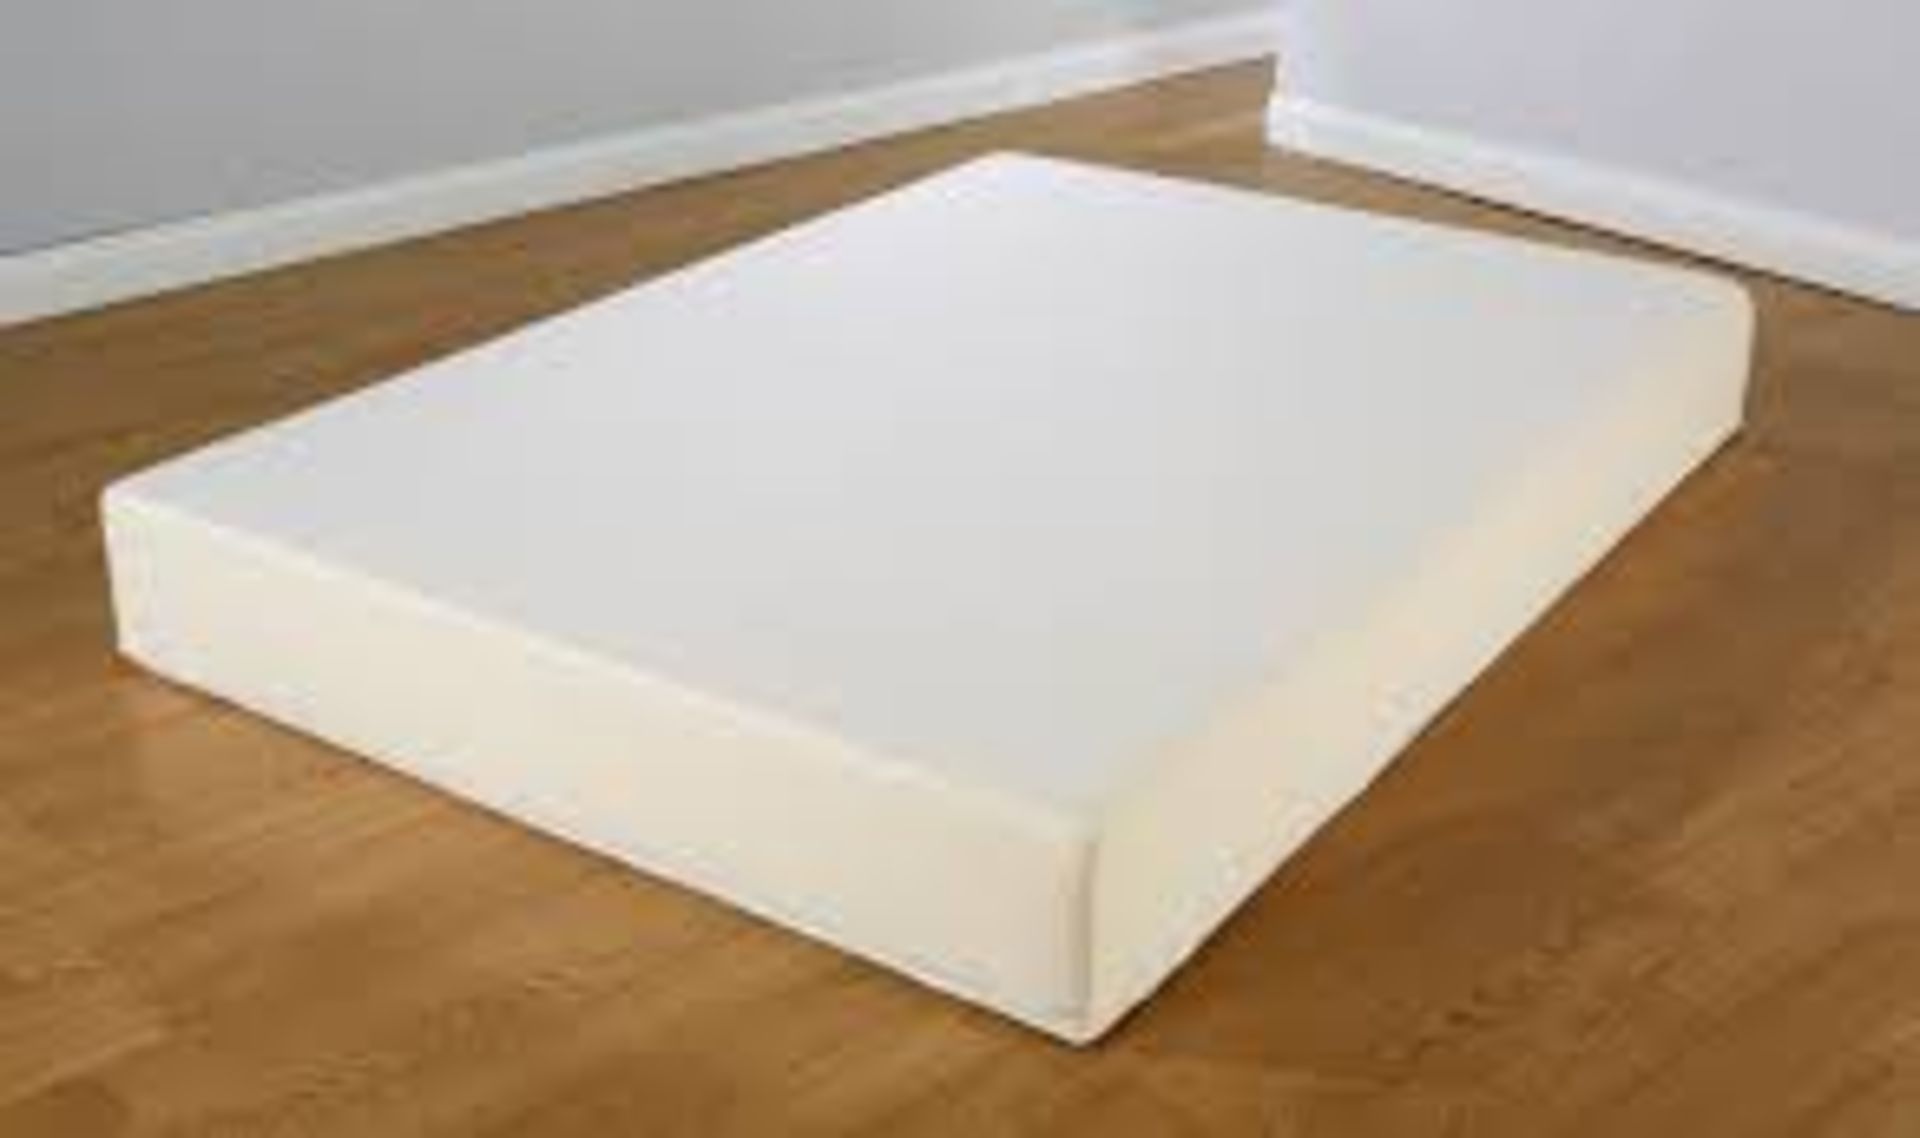 1 BRAND NEW BAGGED, ROLLED AND BOXED CASPIAN 3FT SINGLE MEMORY FOAM MATTRESS 15CM THICKNESS